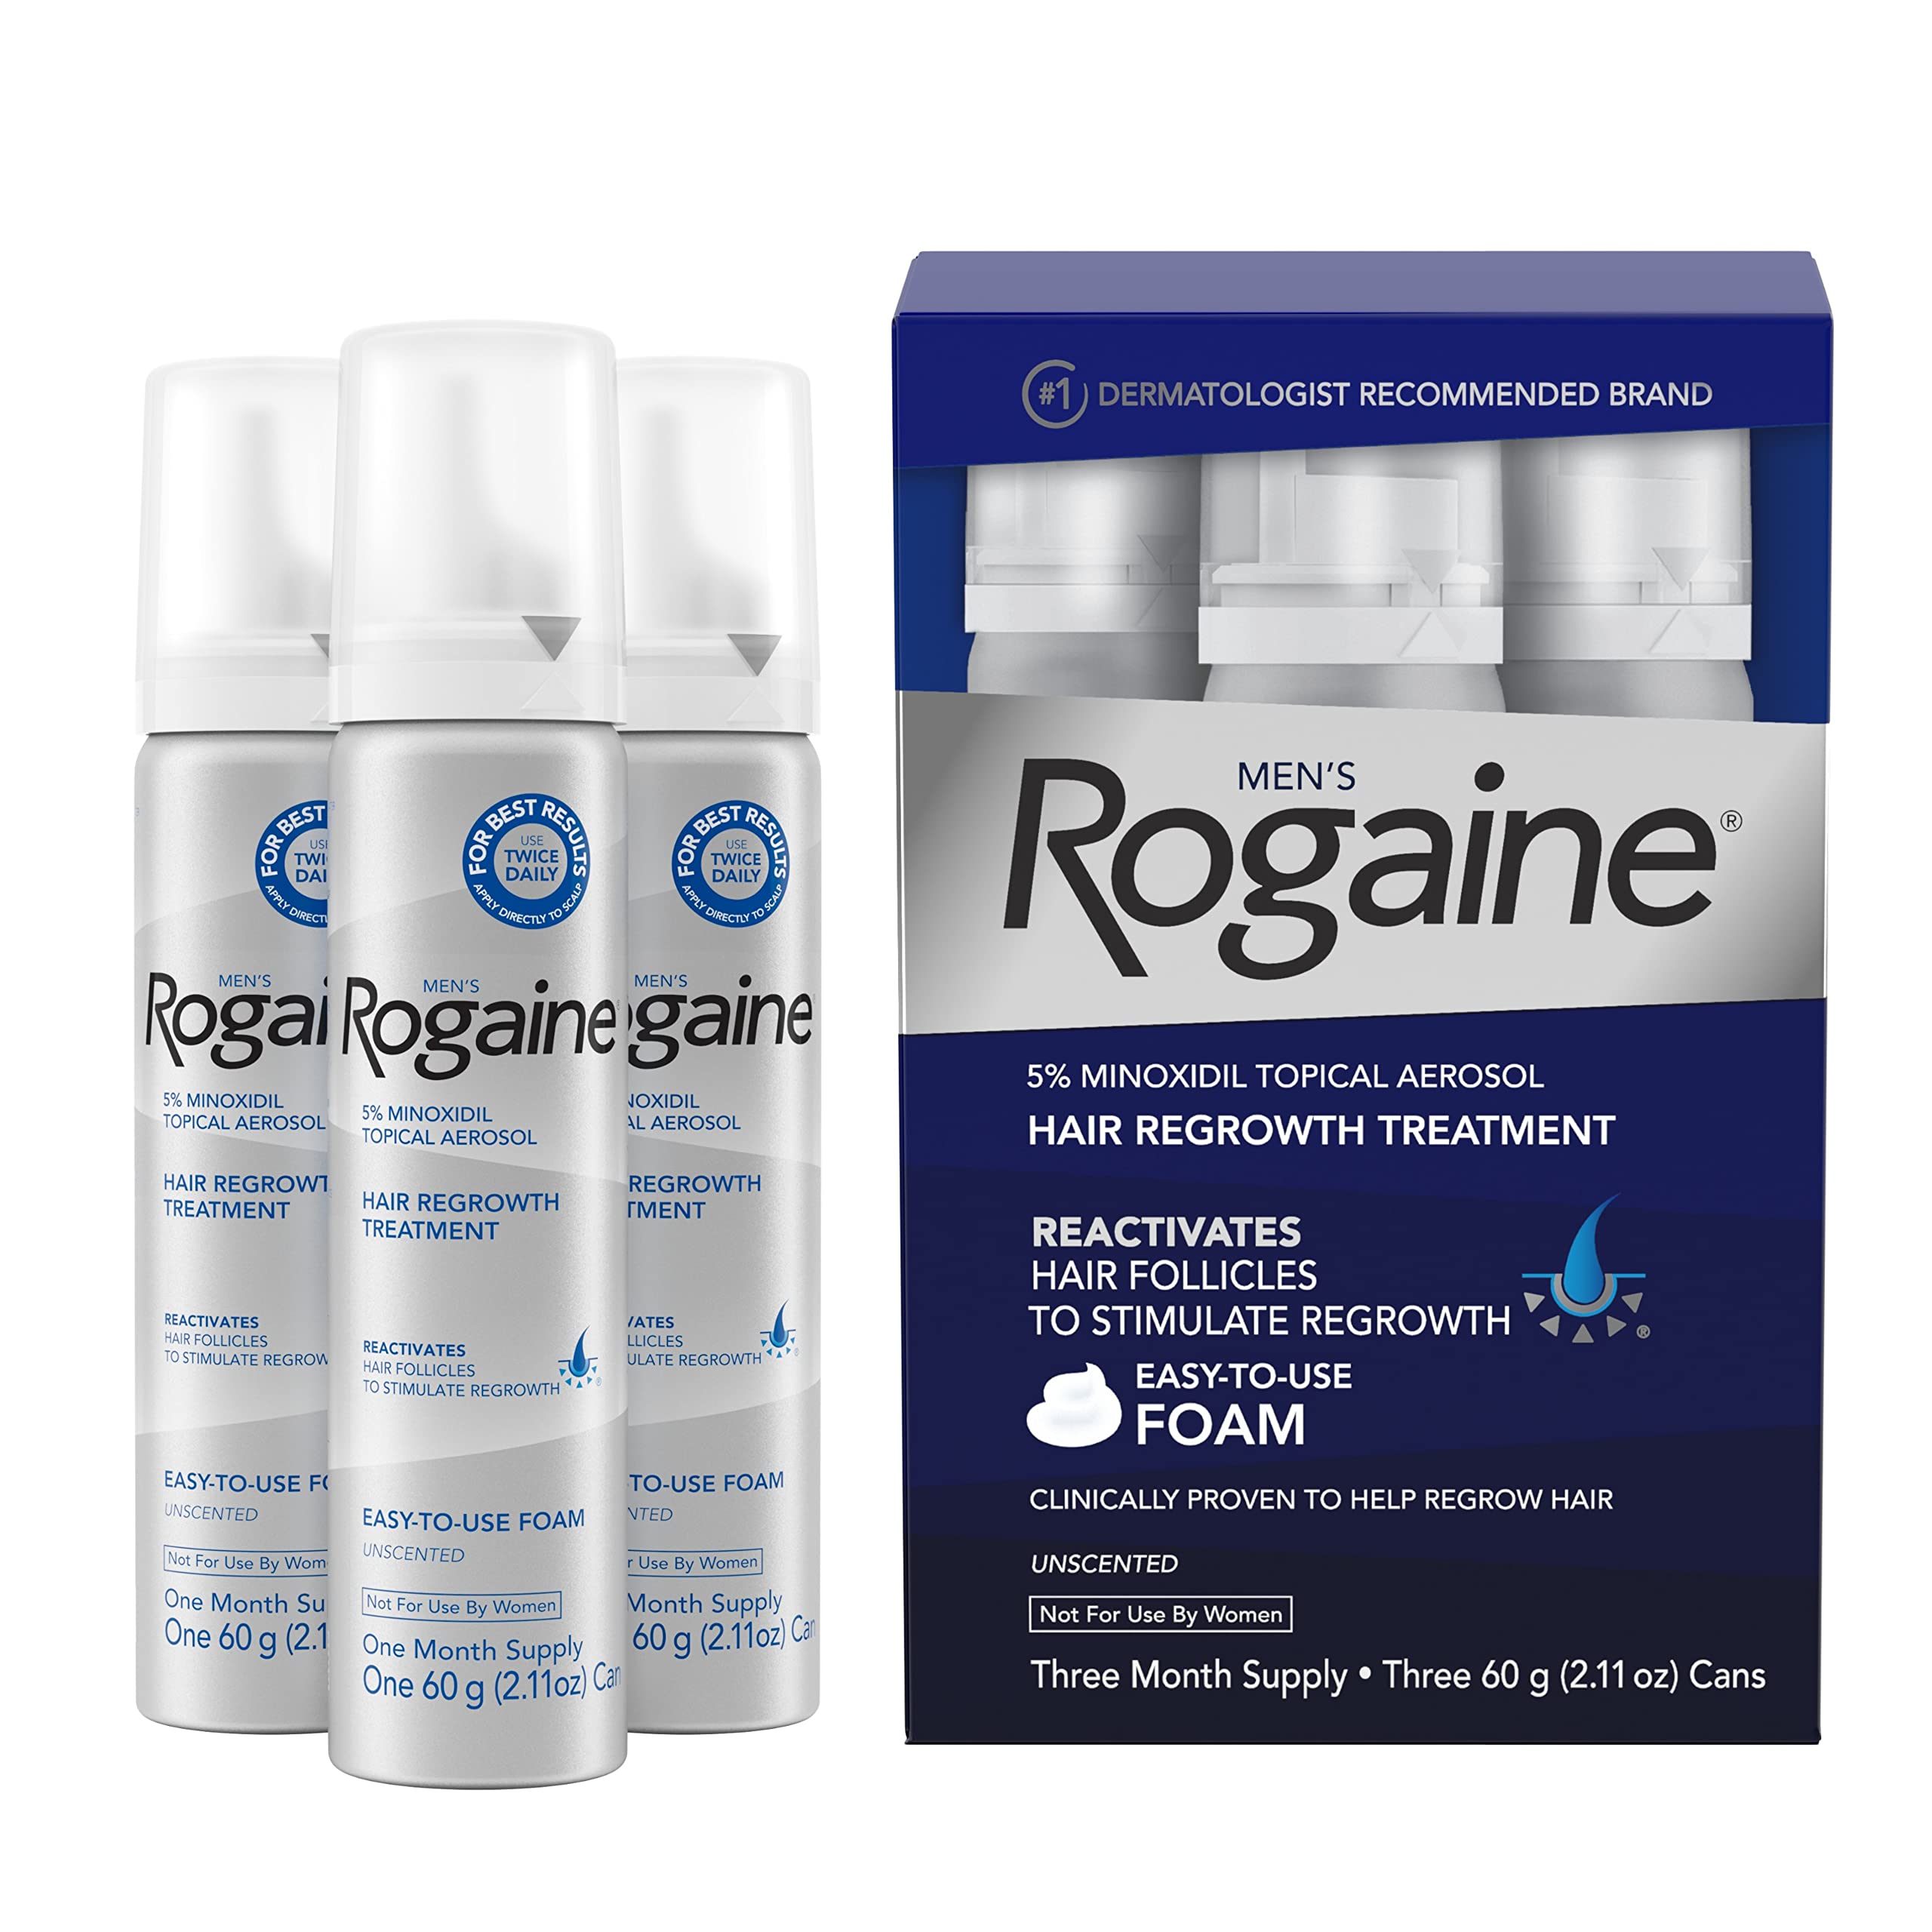 Men's Rogaine 5% Minoxidil Foam for Hair Loss and Hair Regrowth, Topical Treatment for Thinning Hair, 3-Month Supply, 2.11 Ounce (Pack of 3)